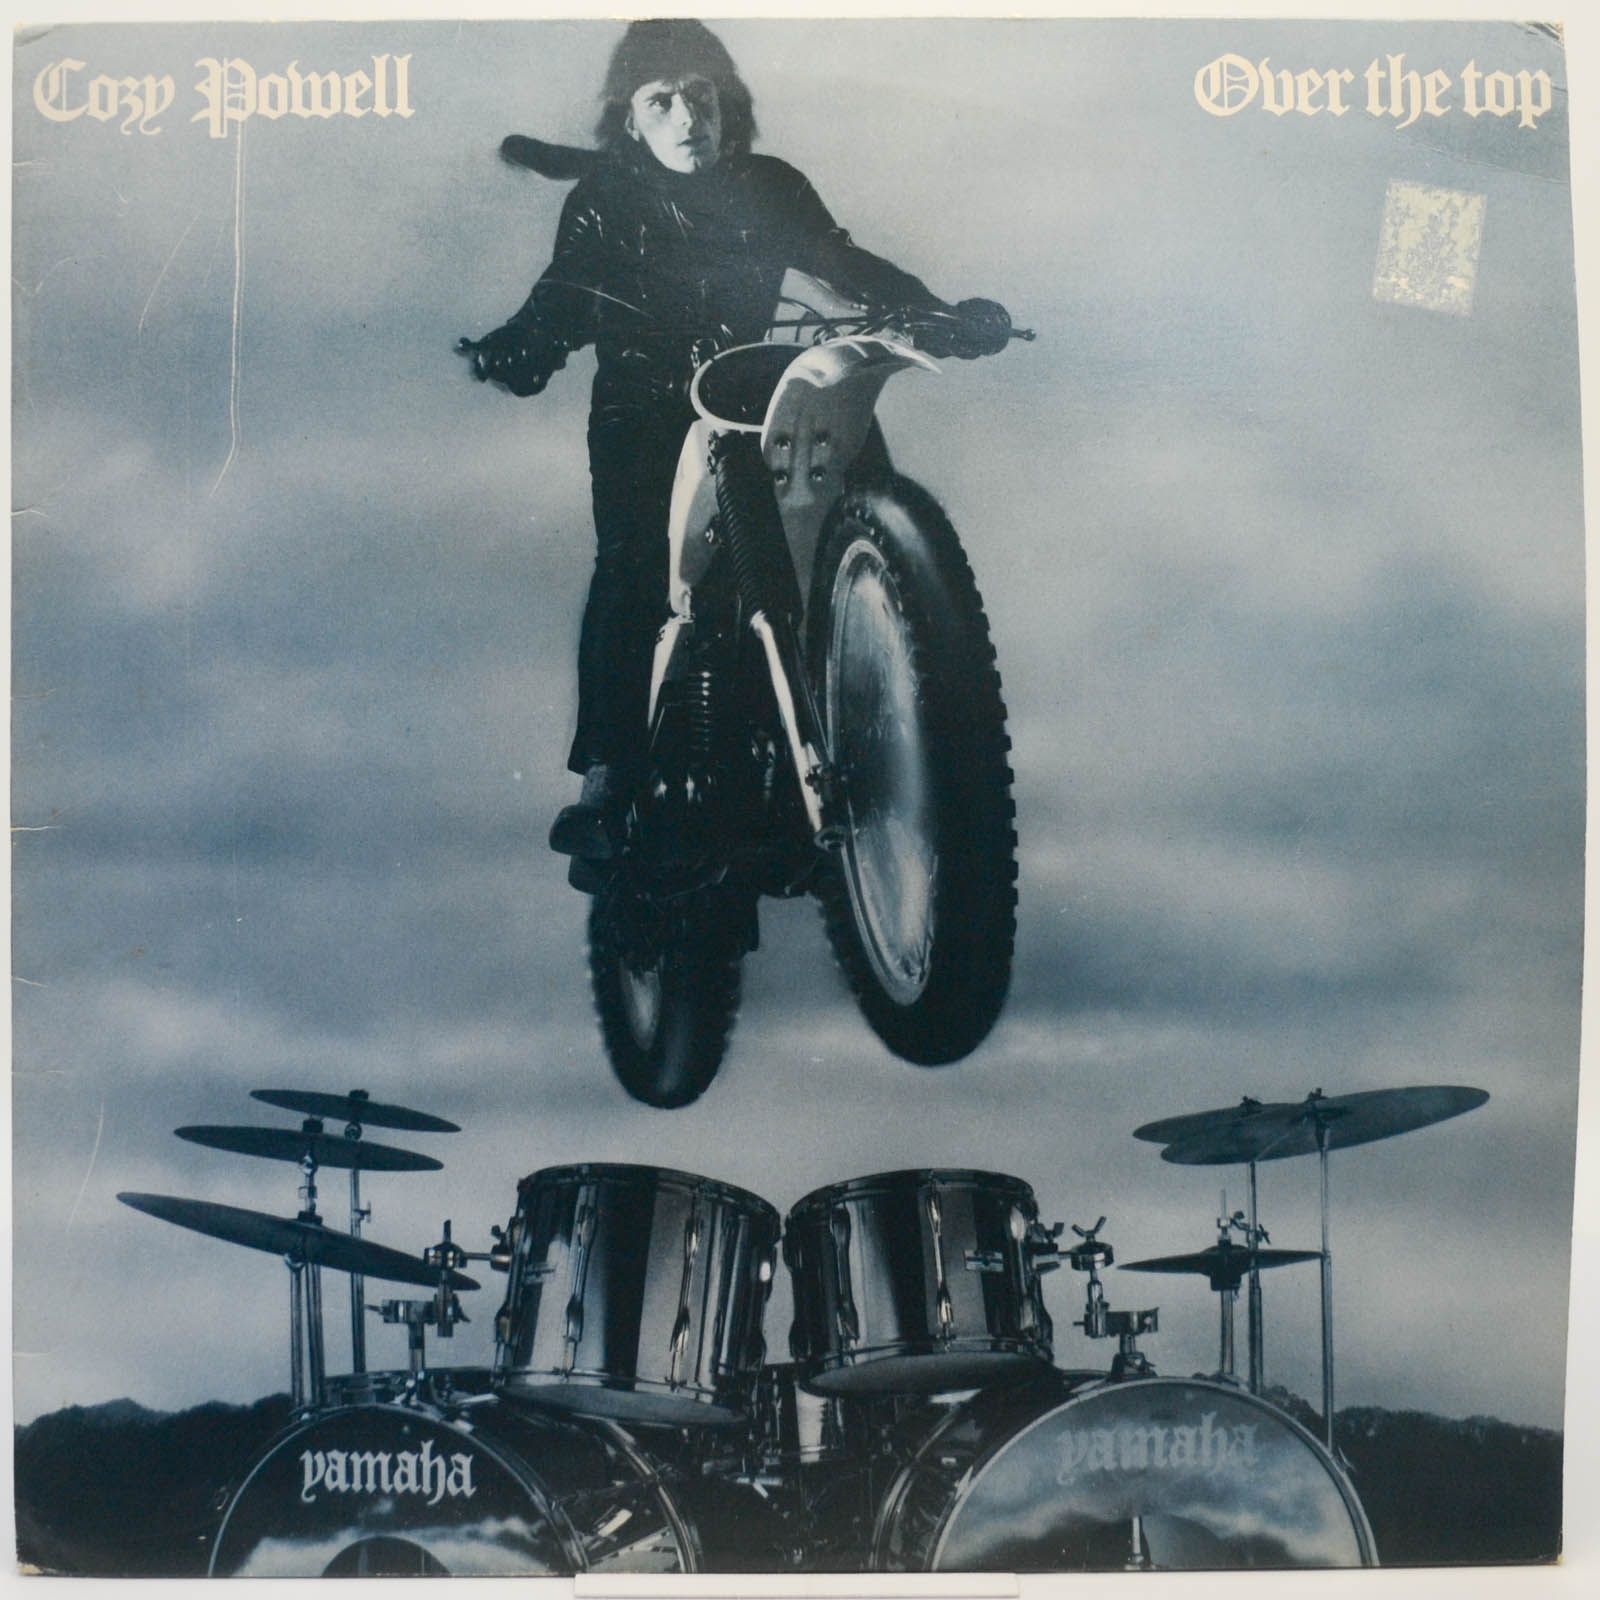 Cozy Powell — Over The Top (1-st, UK), 1979